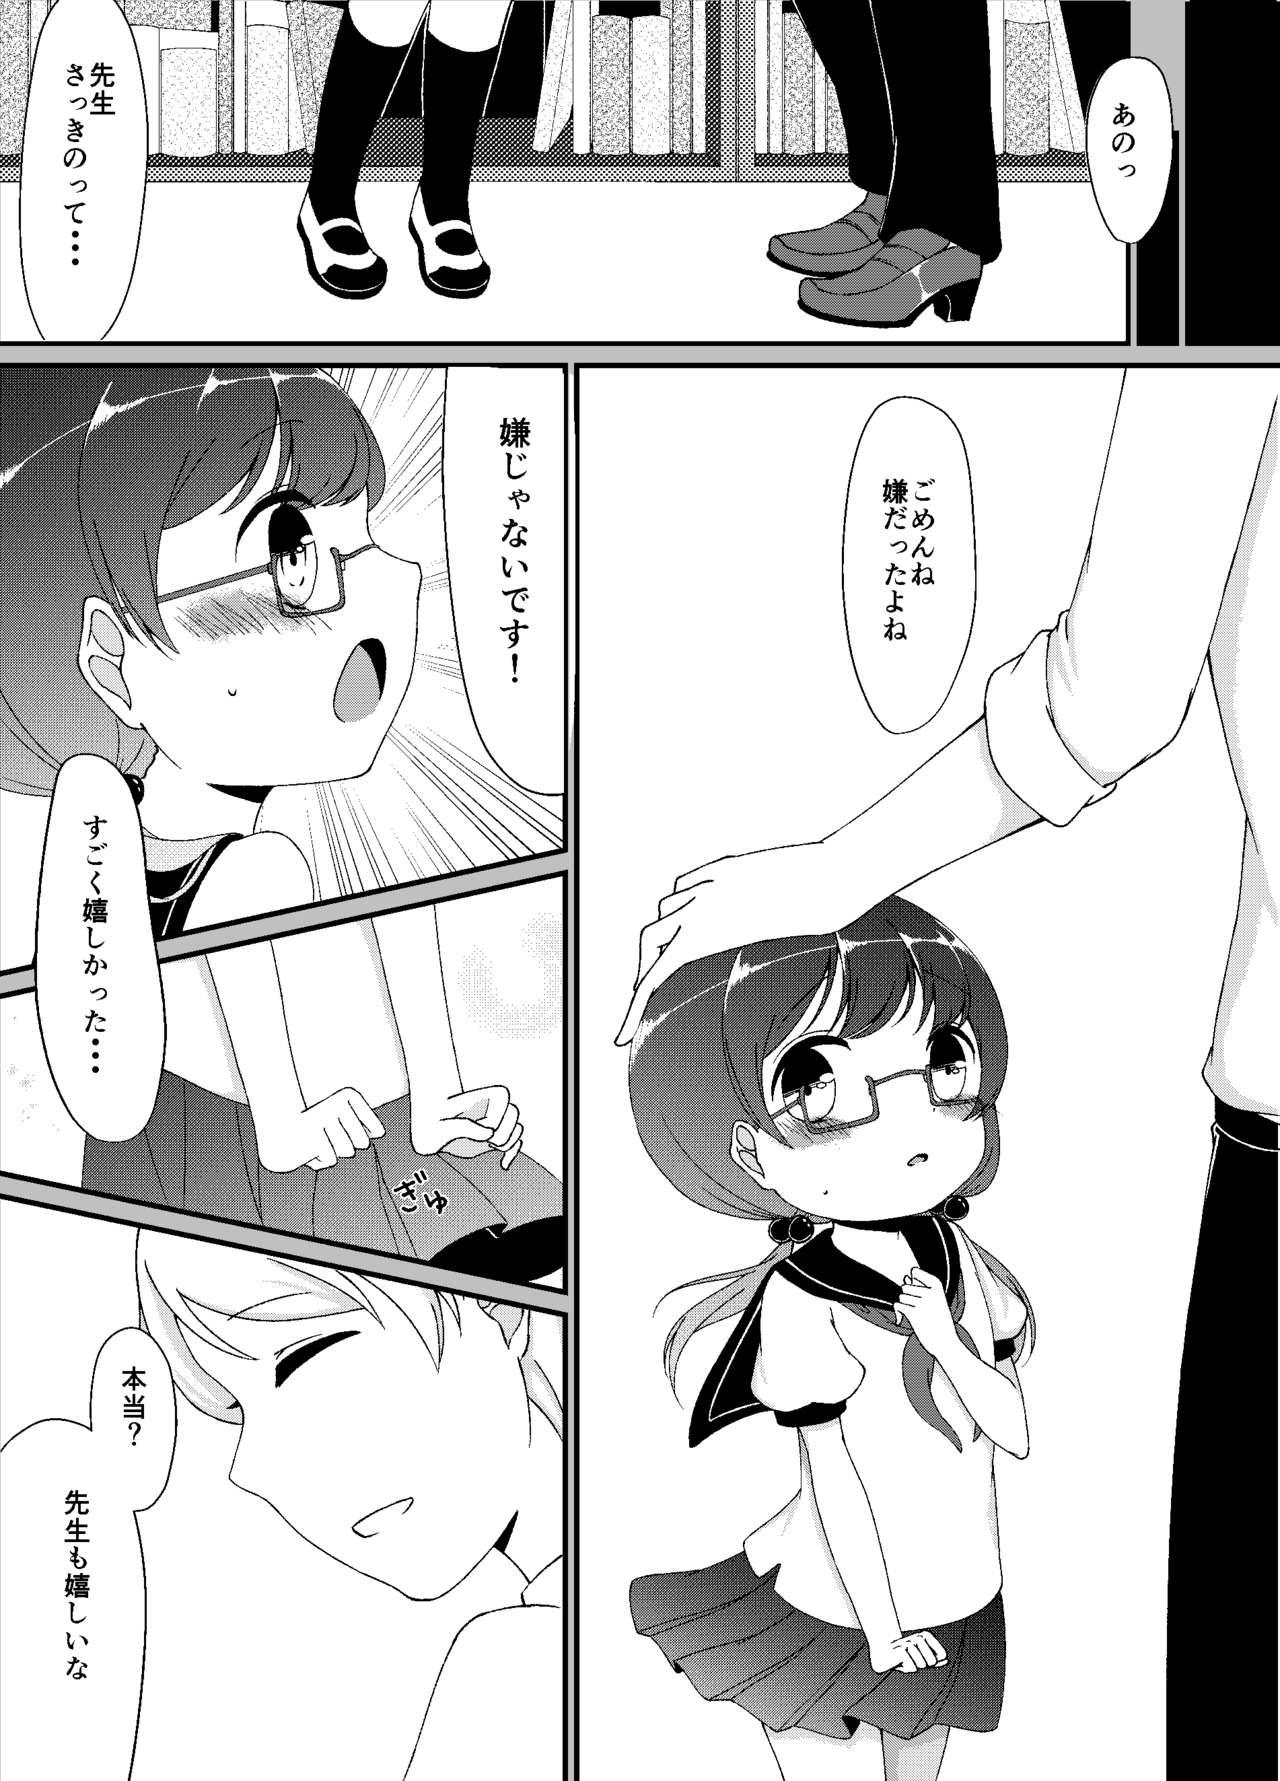 Blackmail 先生あのね。 Ex Girlfriends - Page 13